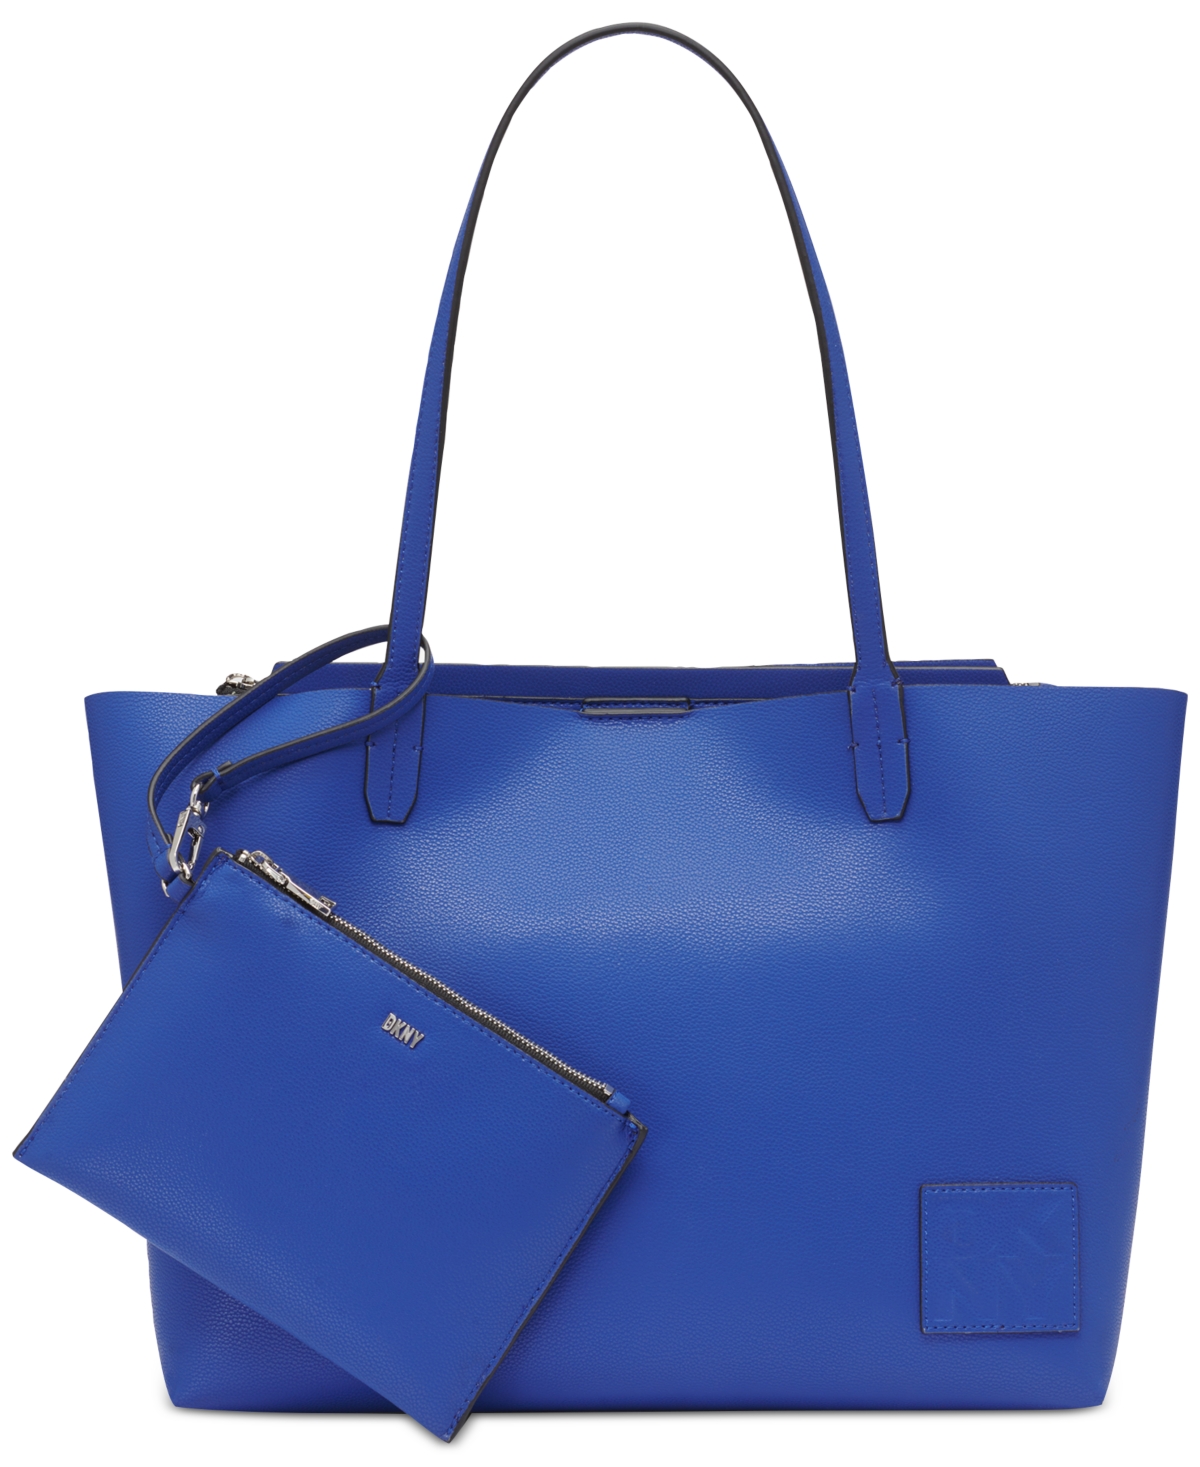 Dkny Riley Tote In Sapphire